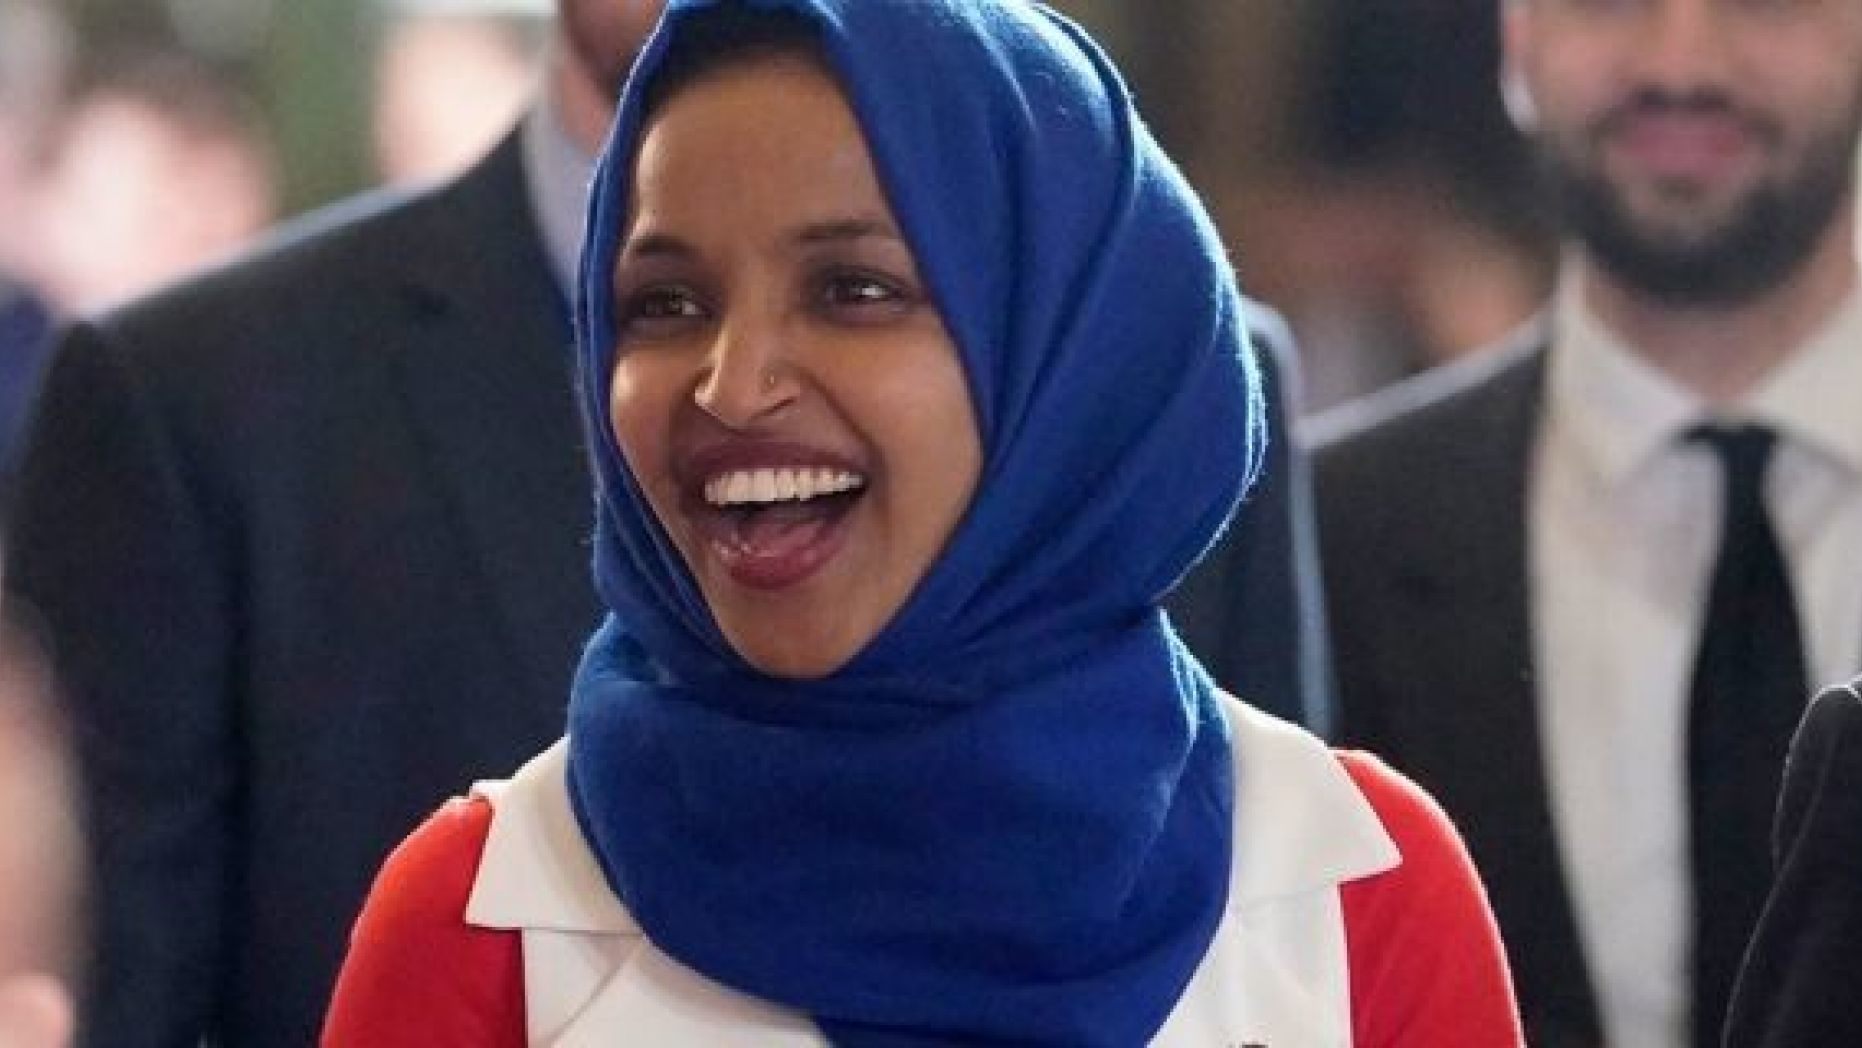 Representative Ilhan Omar Denounced for Comments as Anti-Semitic by Democratic Leaders